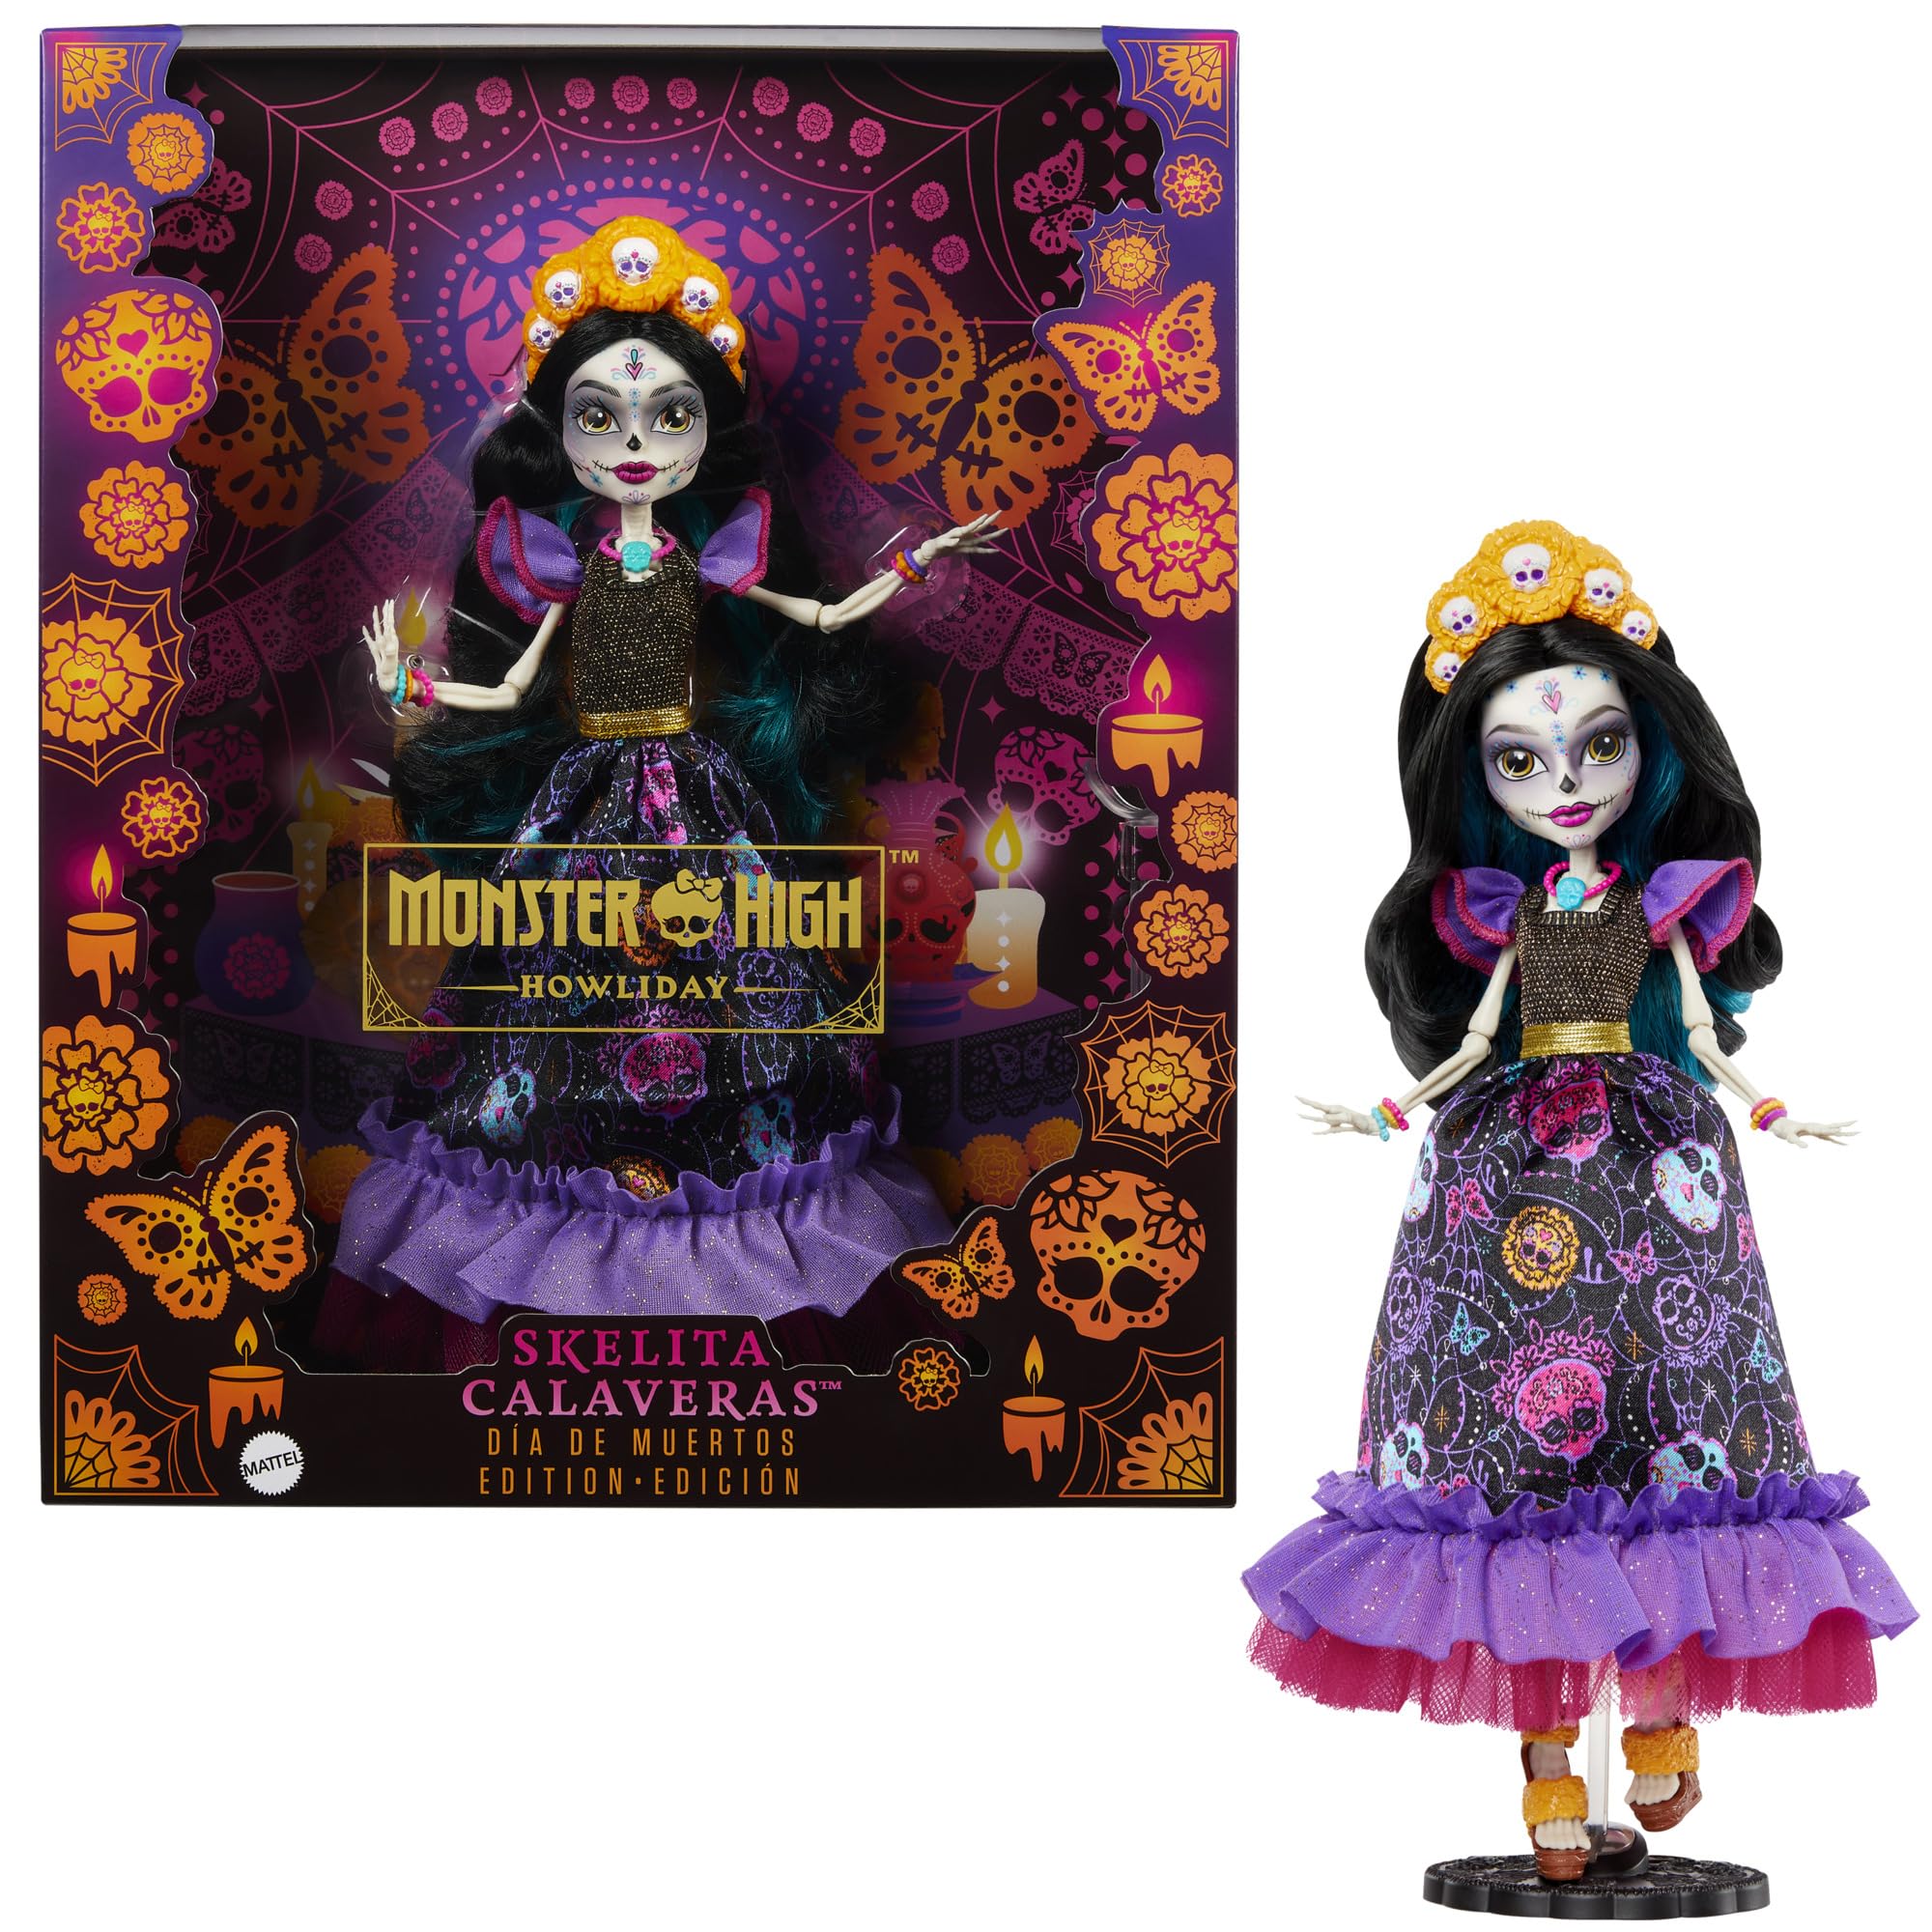 Monster High Doll, Skelita Calaveras Día De Muertos Collectible with Displayable Packaging, Colorful Fashion with Traditional Details